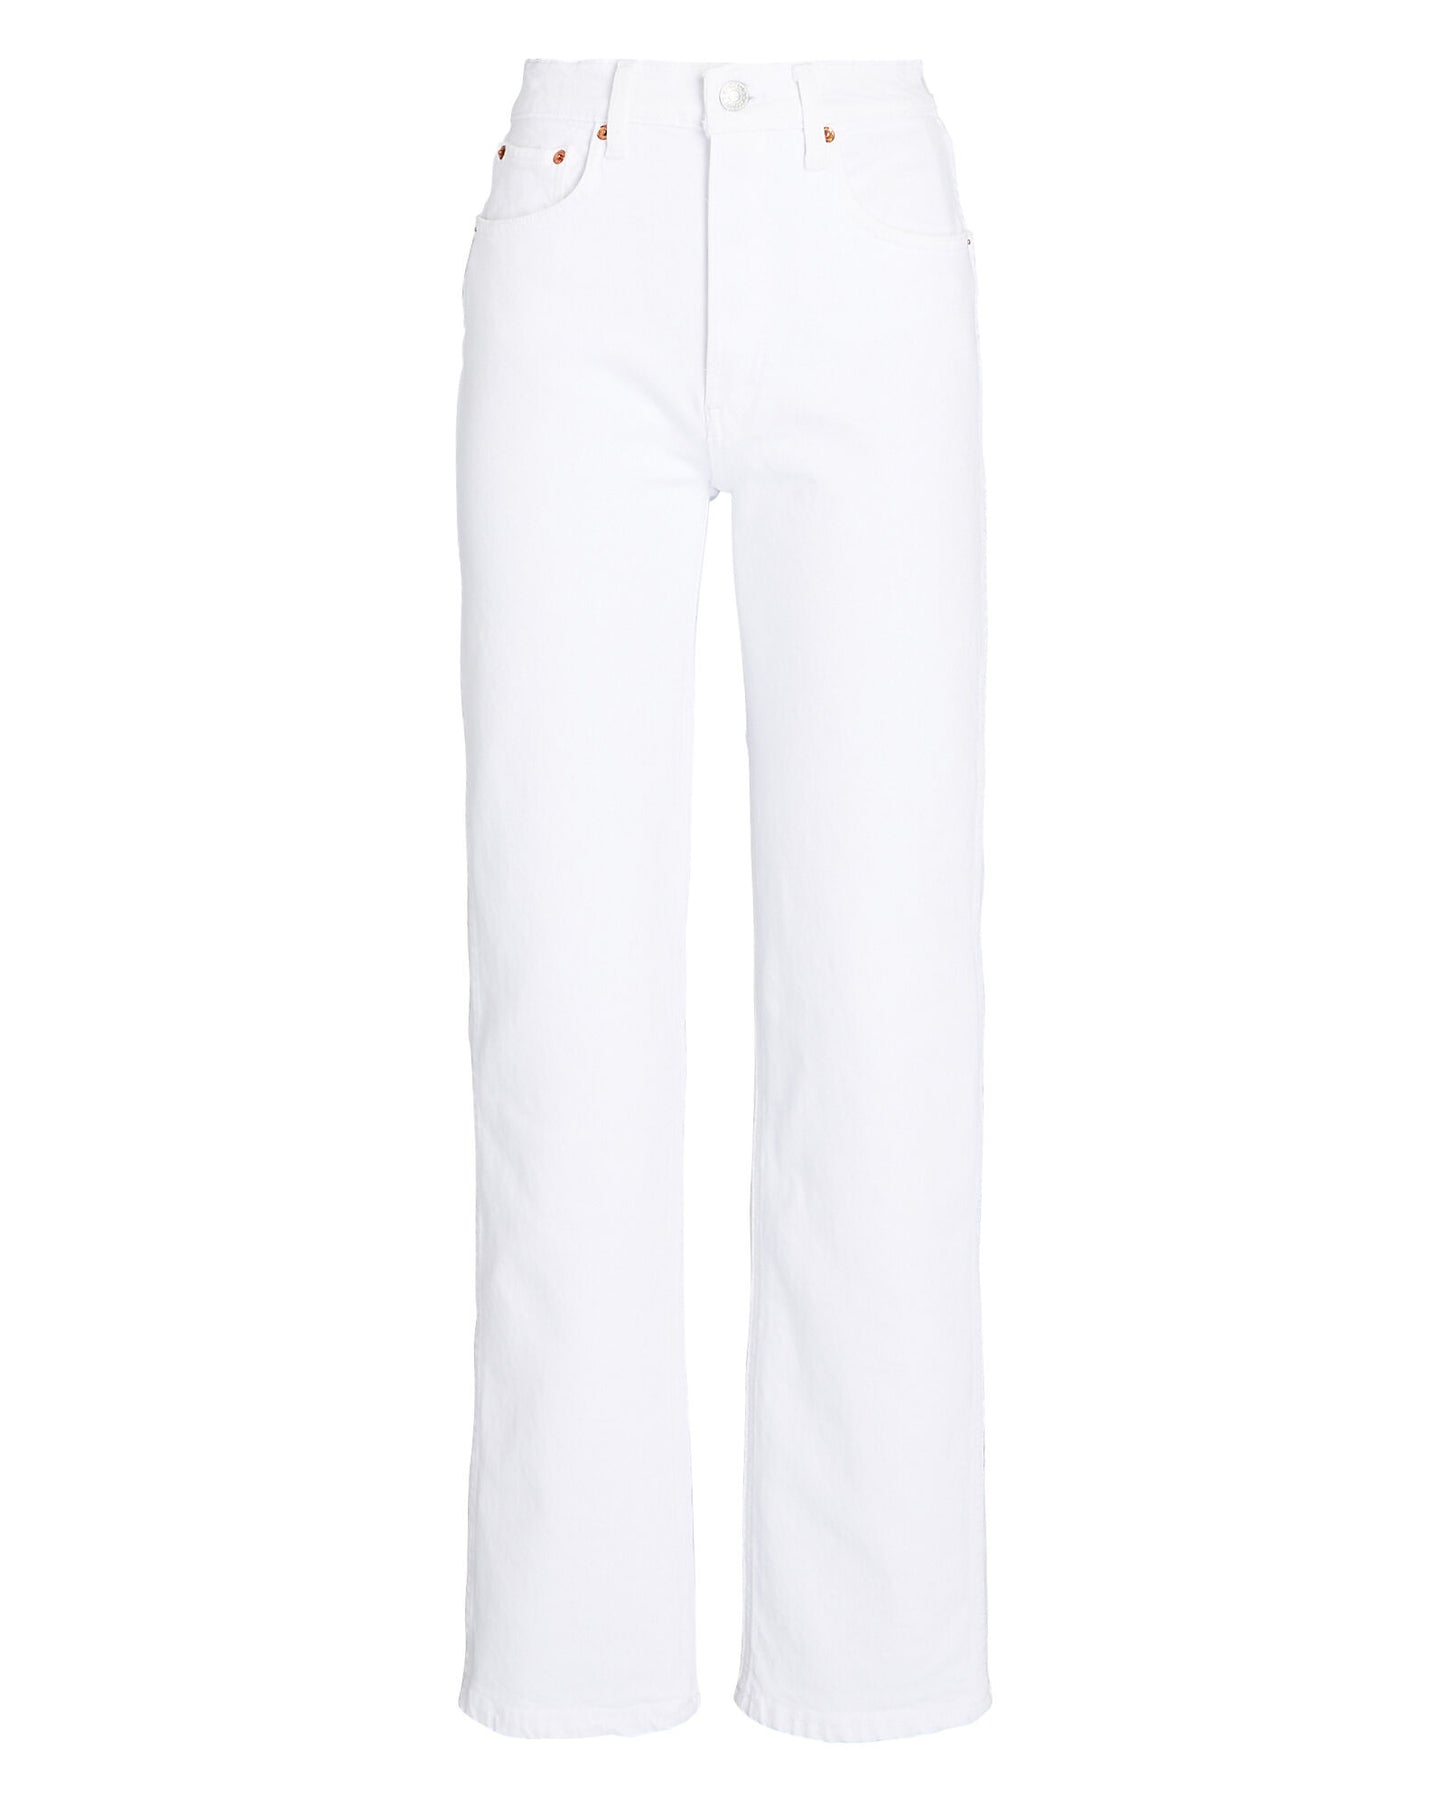 RE/DONE Women's 90s High Rise Comfort Stretch Loose Jeans, White